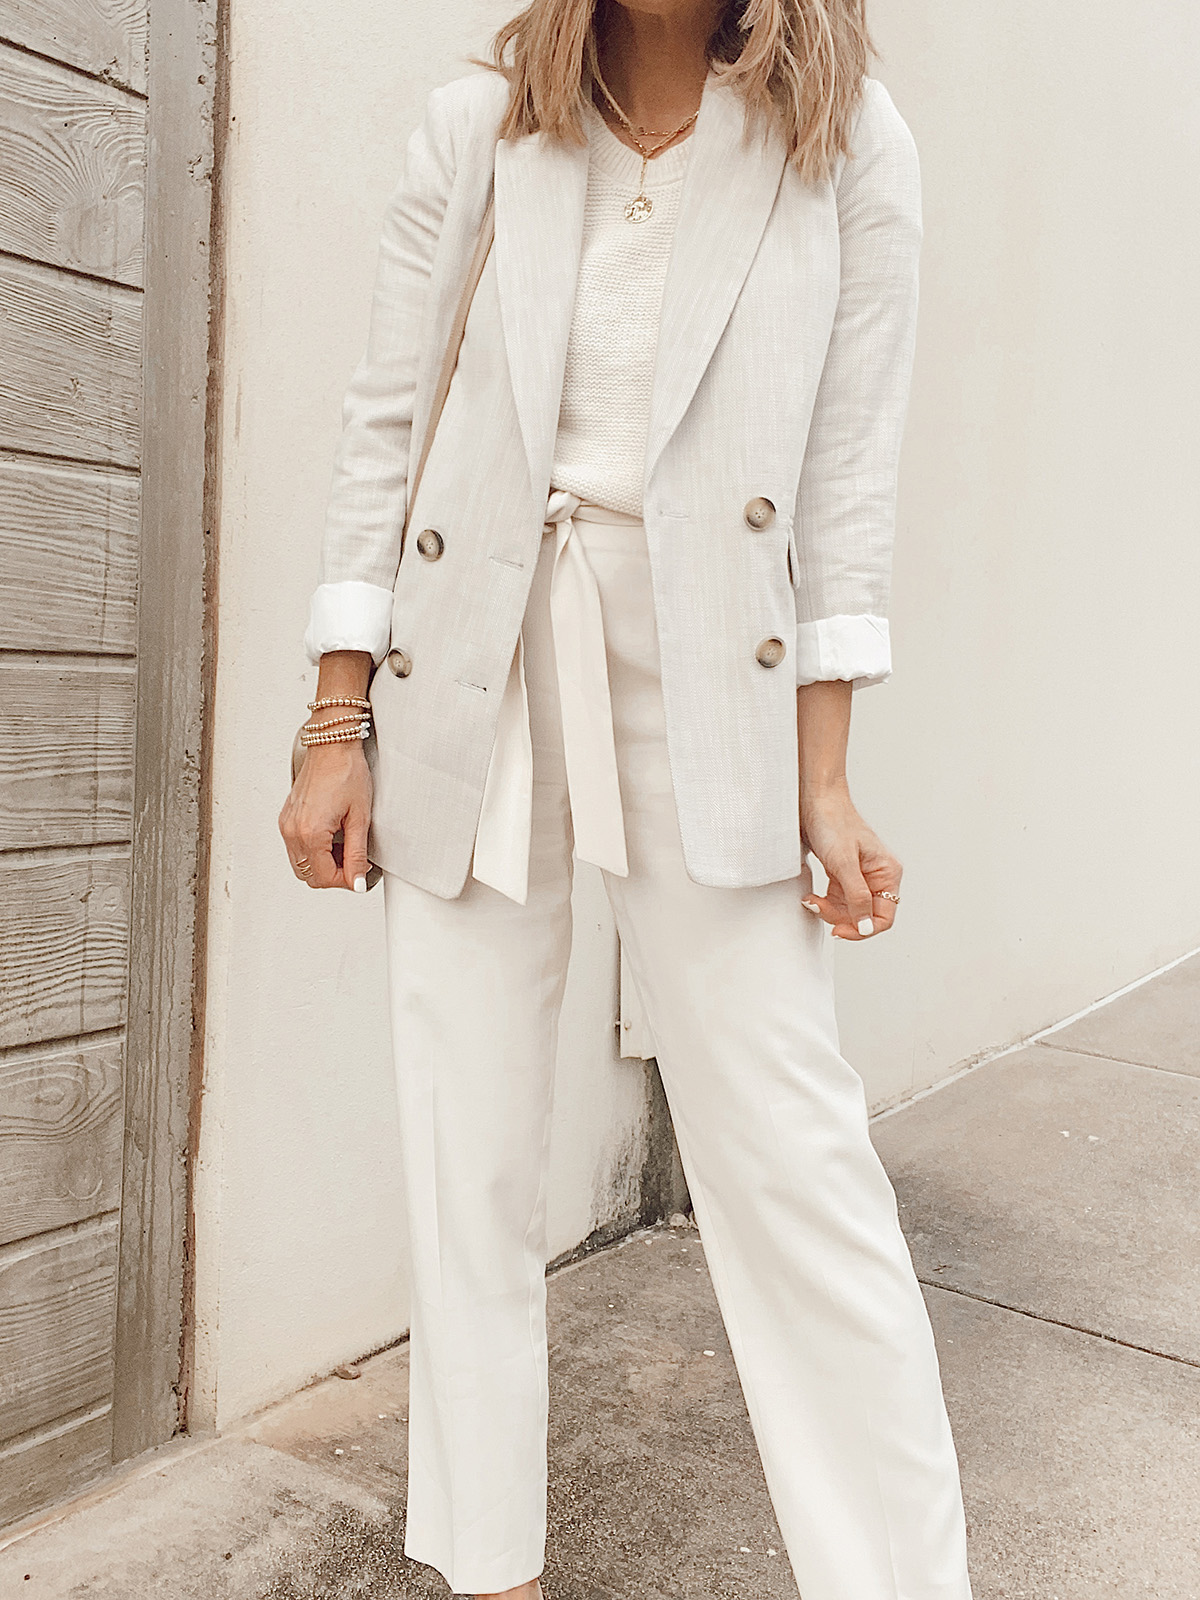 blazer you can wear from work to weekend - white topshop double breasted blazer